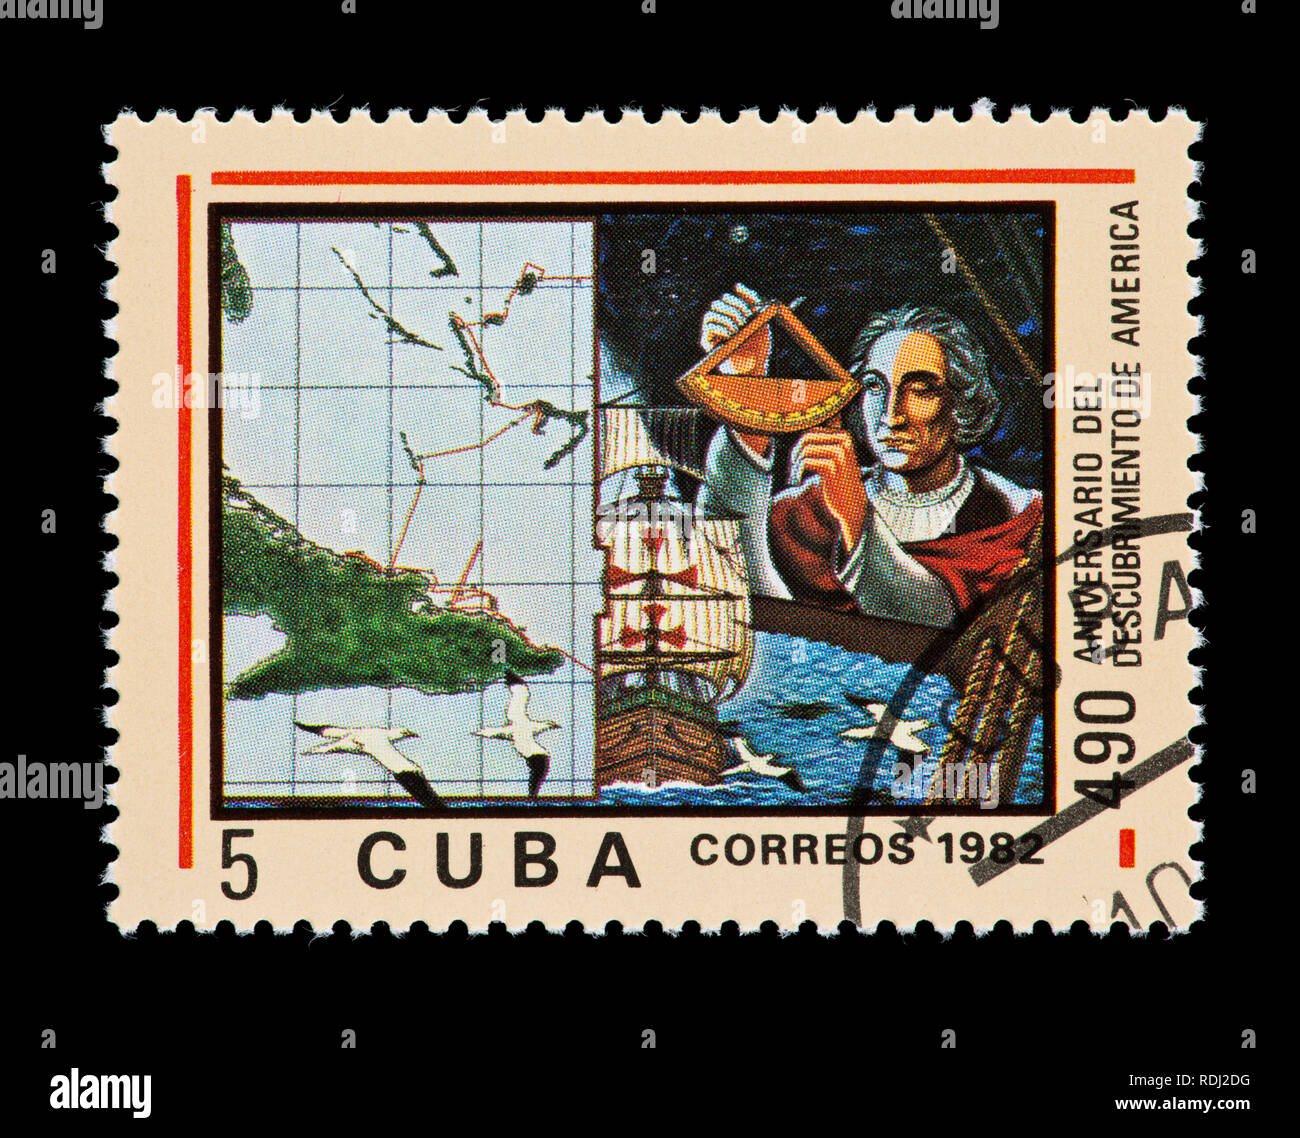 Postage stamp from Cuba depicting Christopher Columbus with a sextant, ship and map of the island of Cuba Stock Photo